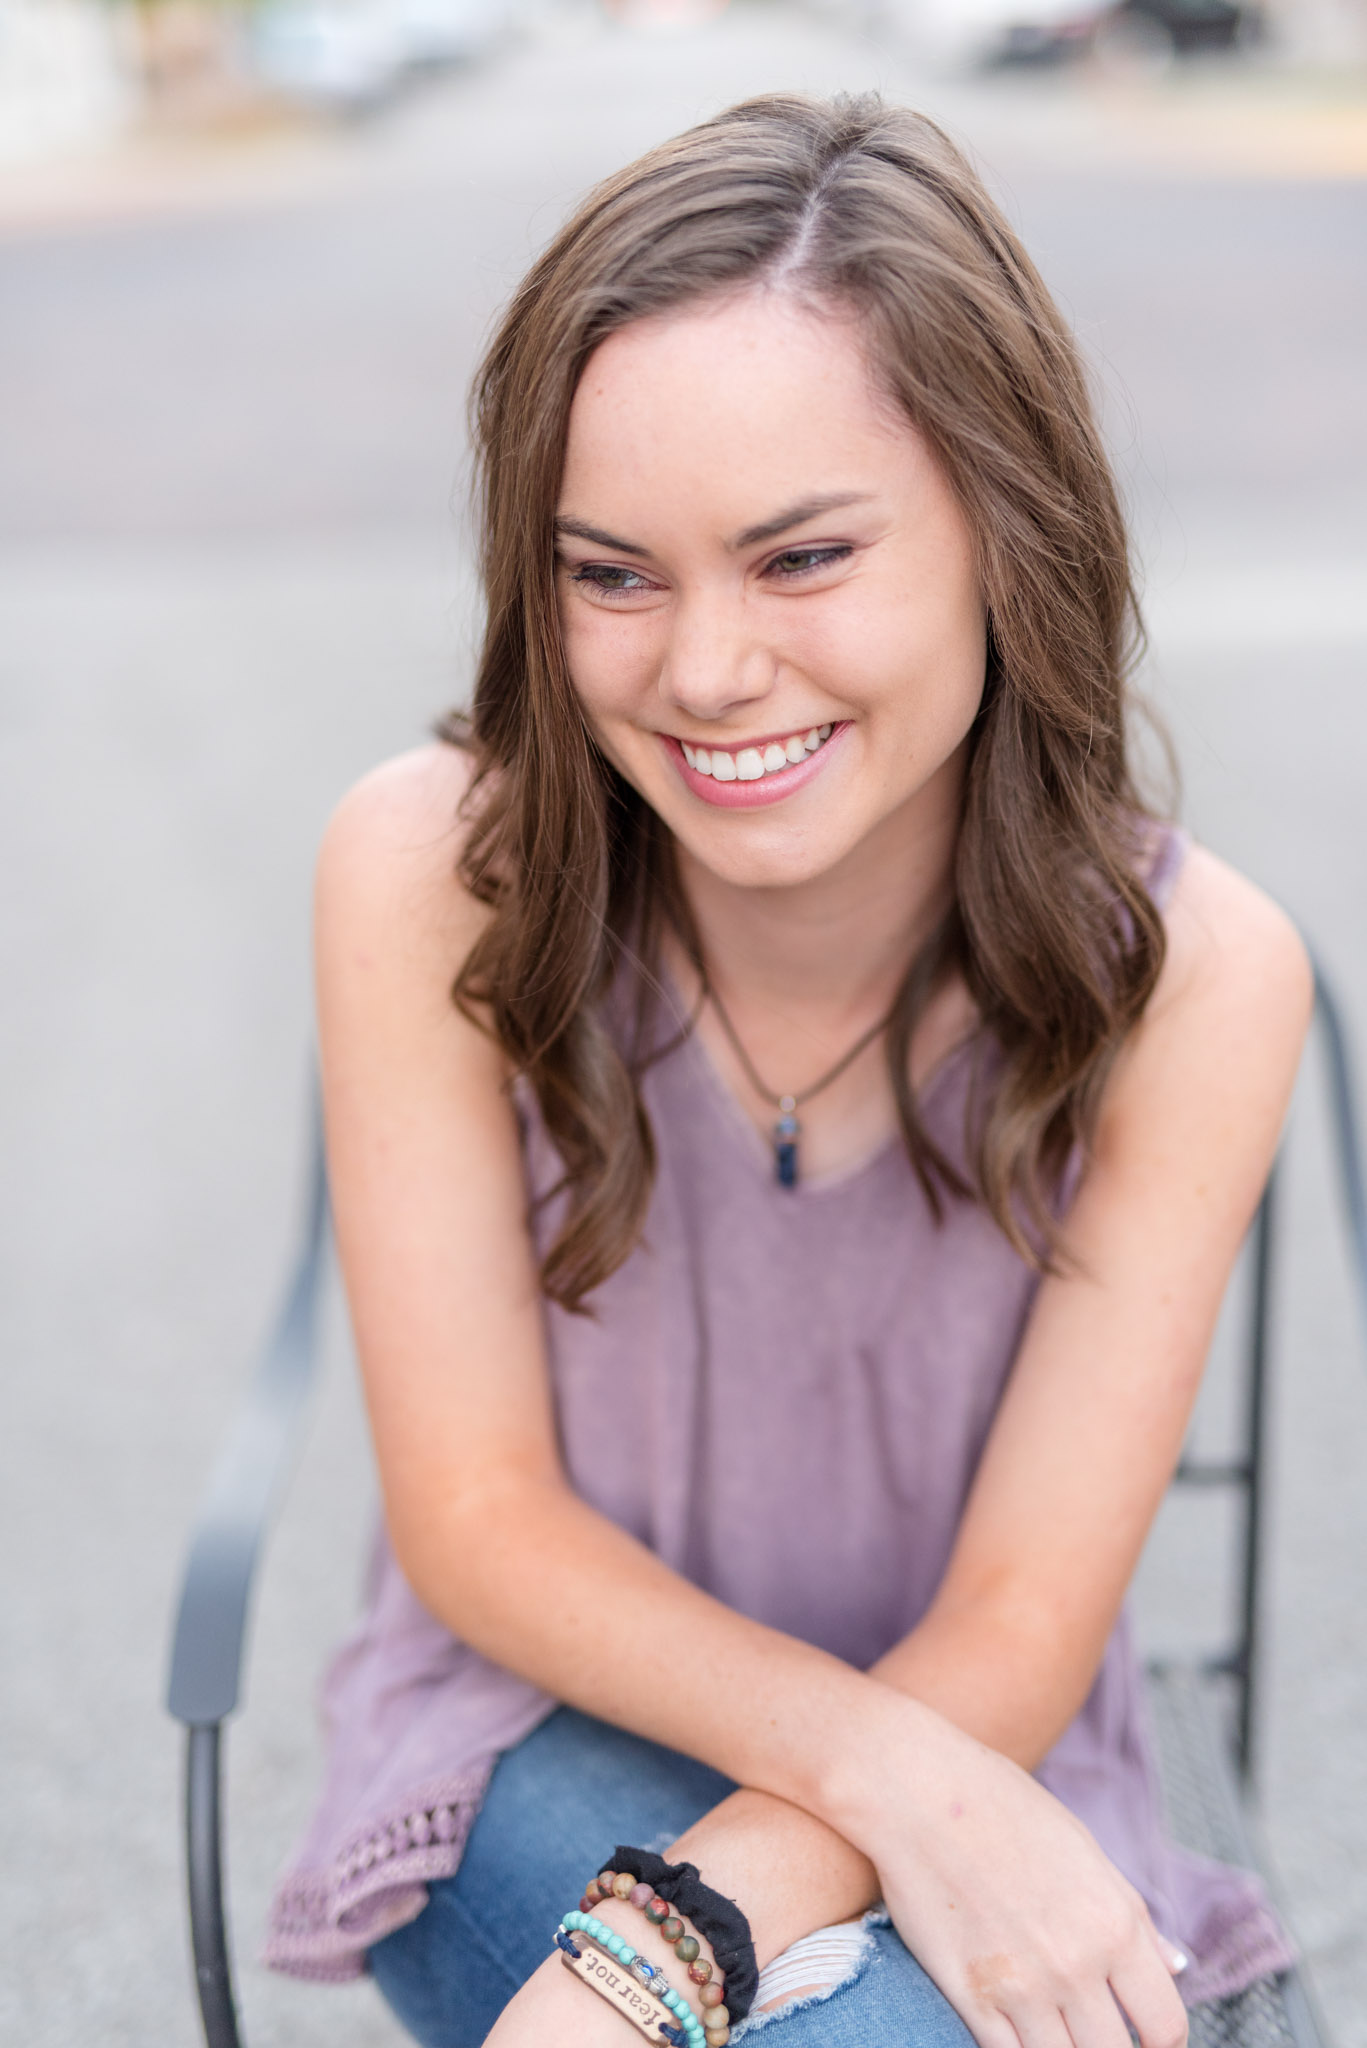 Senior girl sits in chair and smiles off camera.